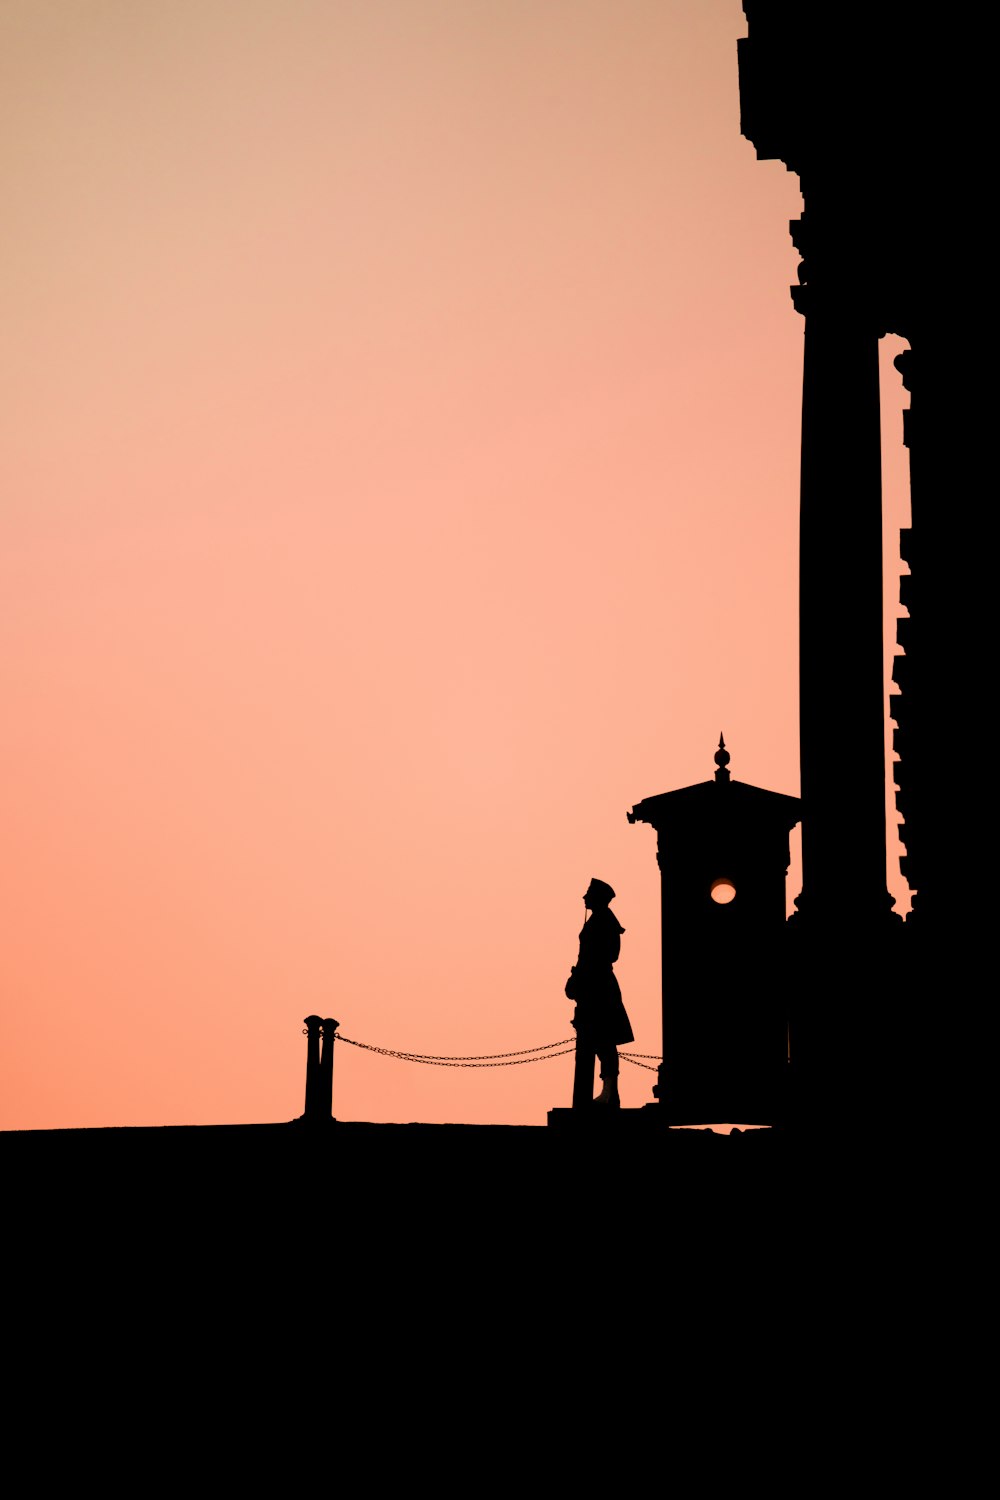 a silhouette of a person standing next to a clock tower